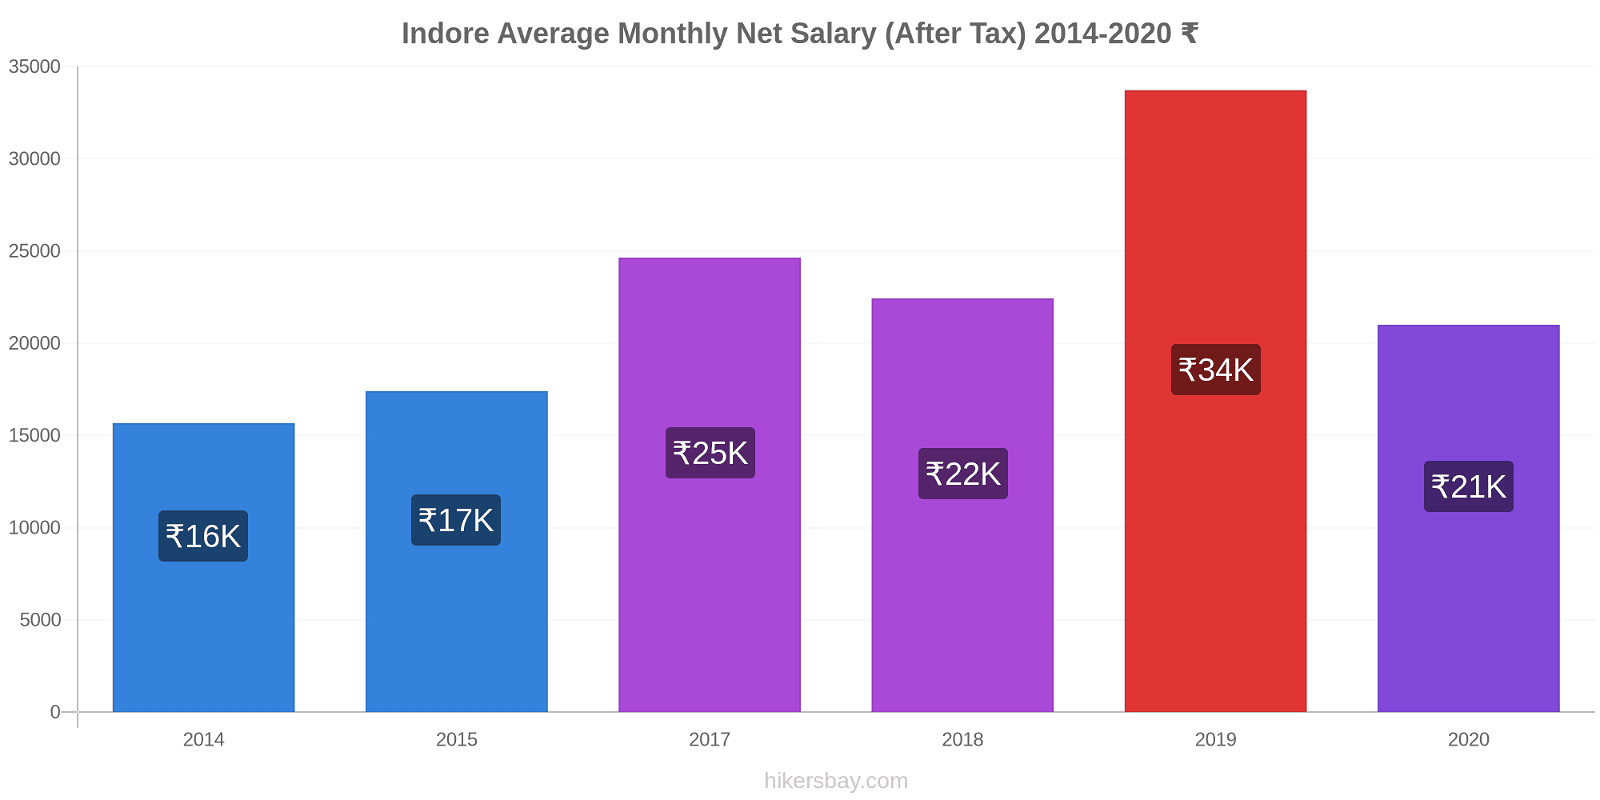 Indore price changes Average Monthly Net Salary (After Tax) hikersbay.com